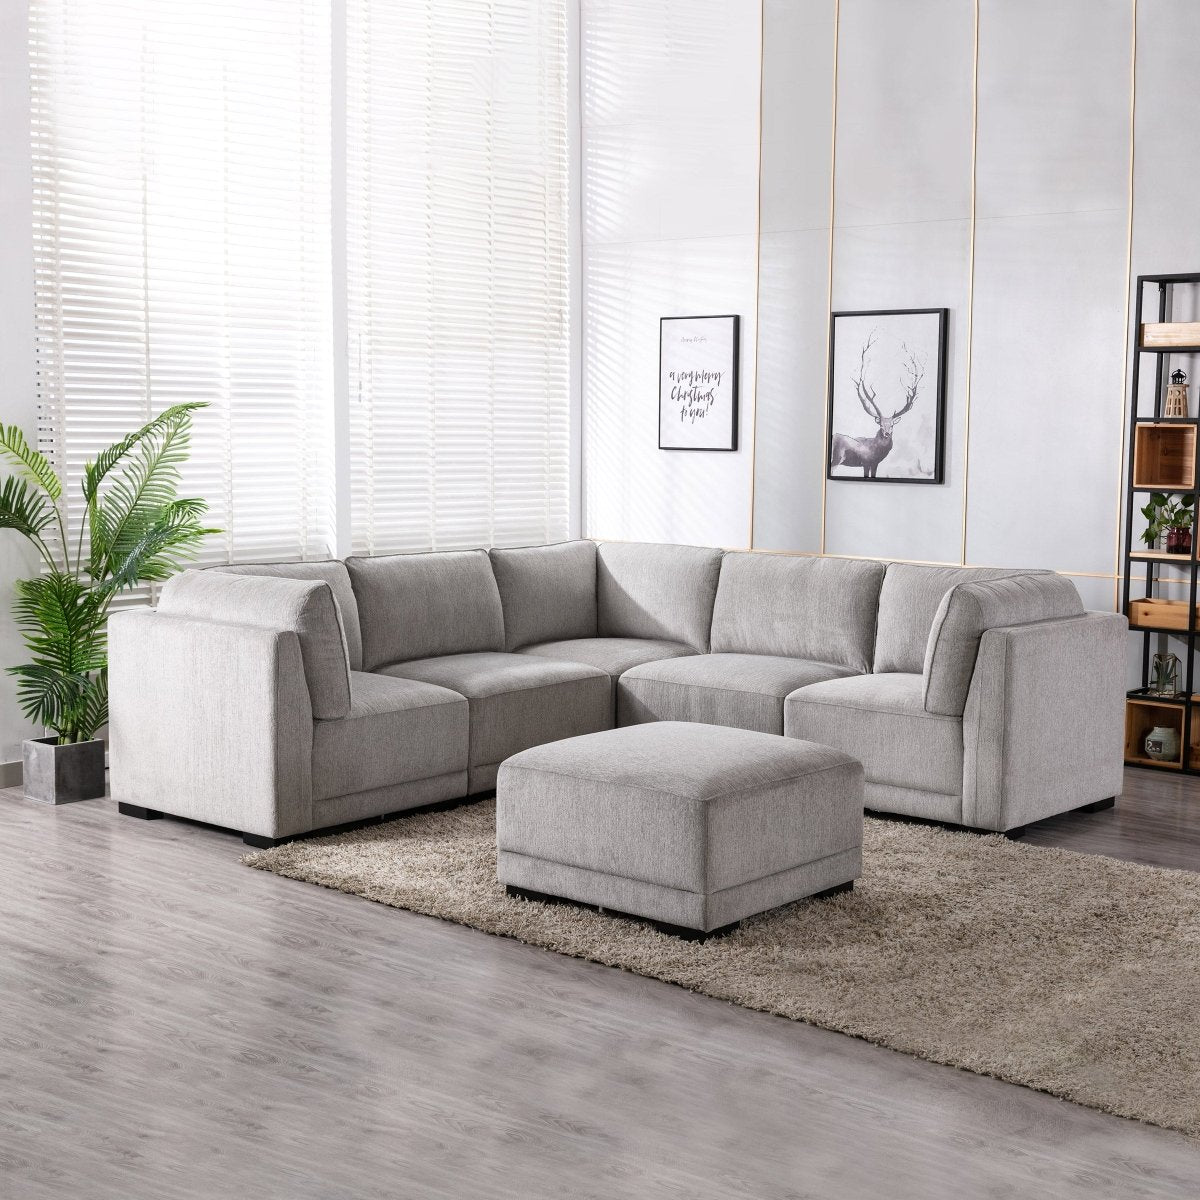 Belize Fabric Sectional - Alpine Outlets